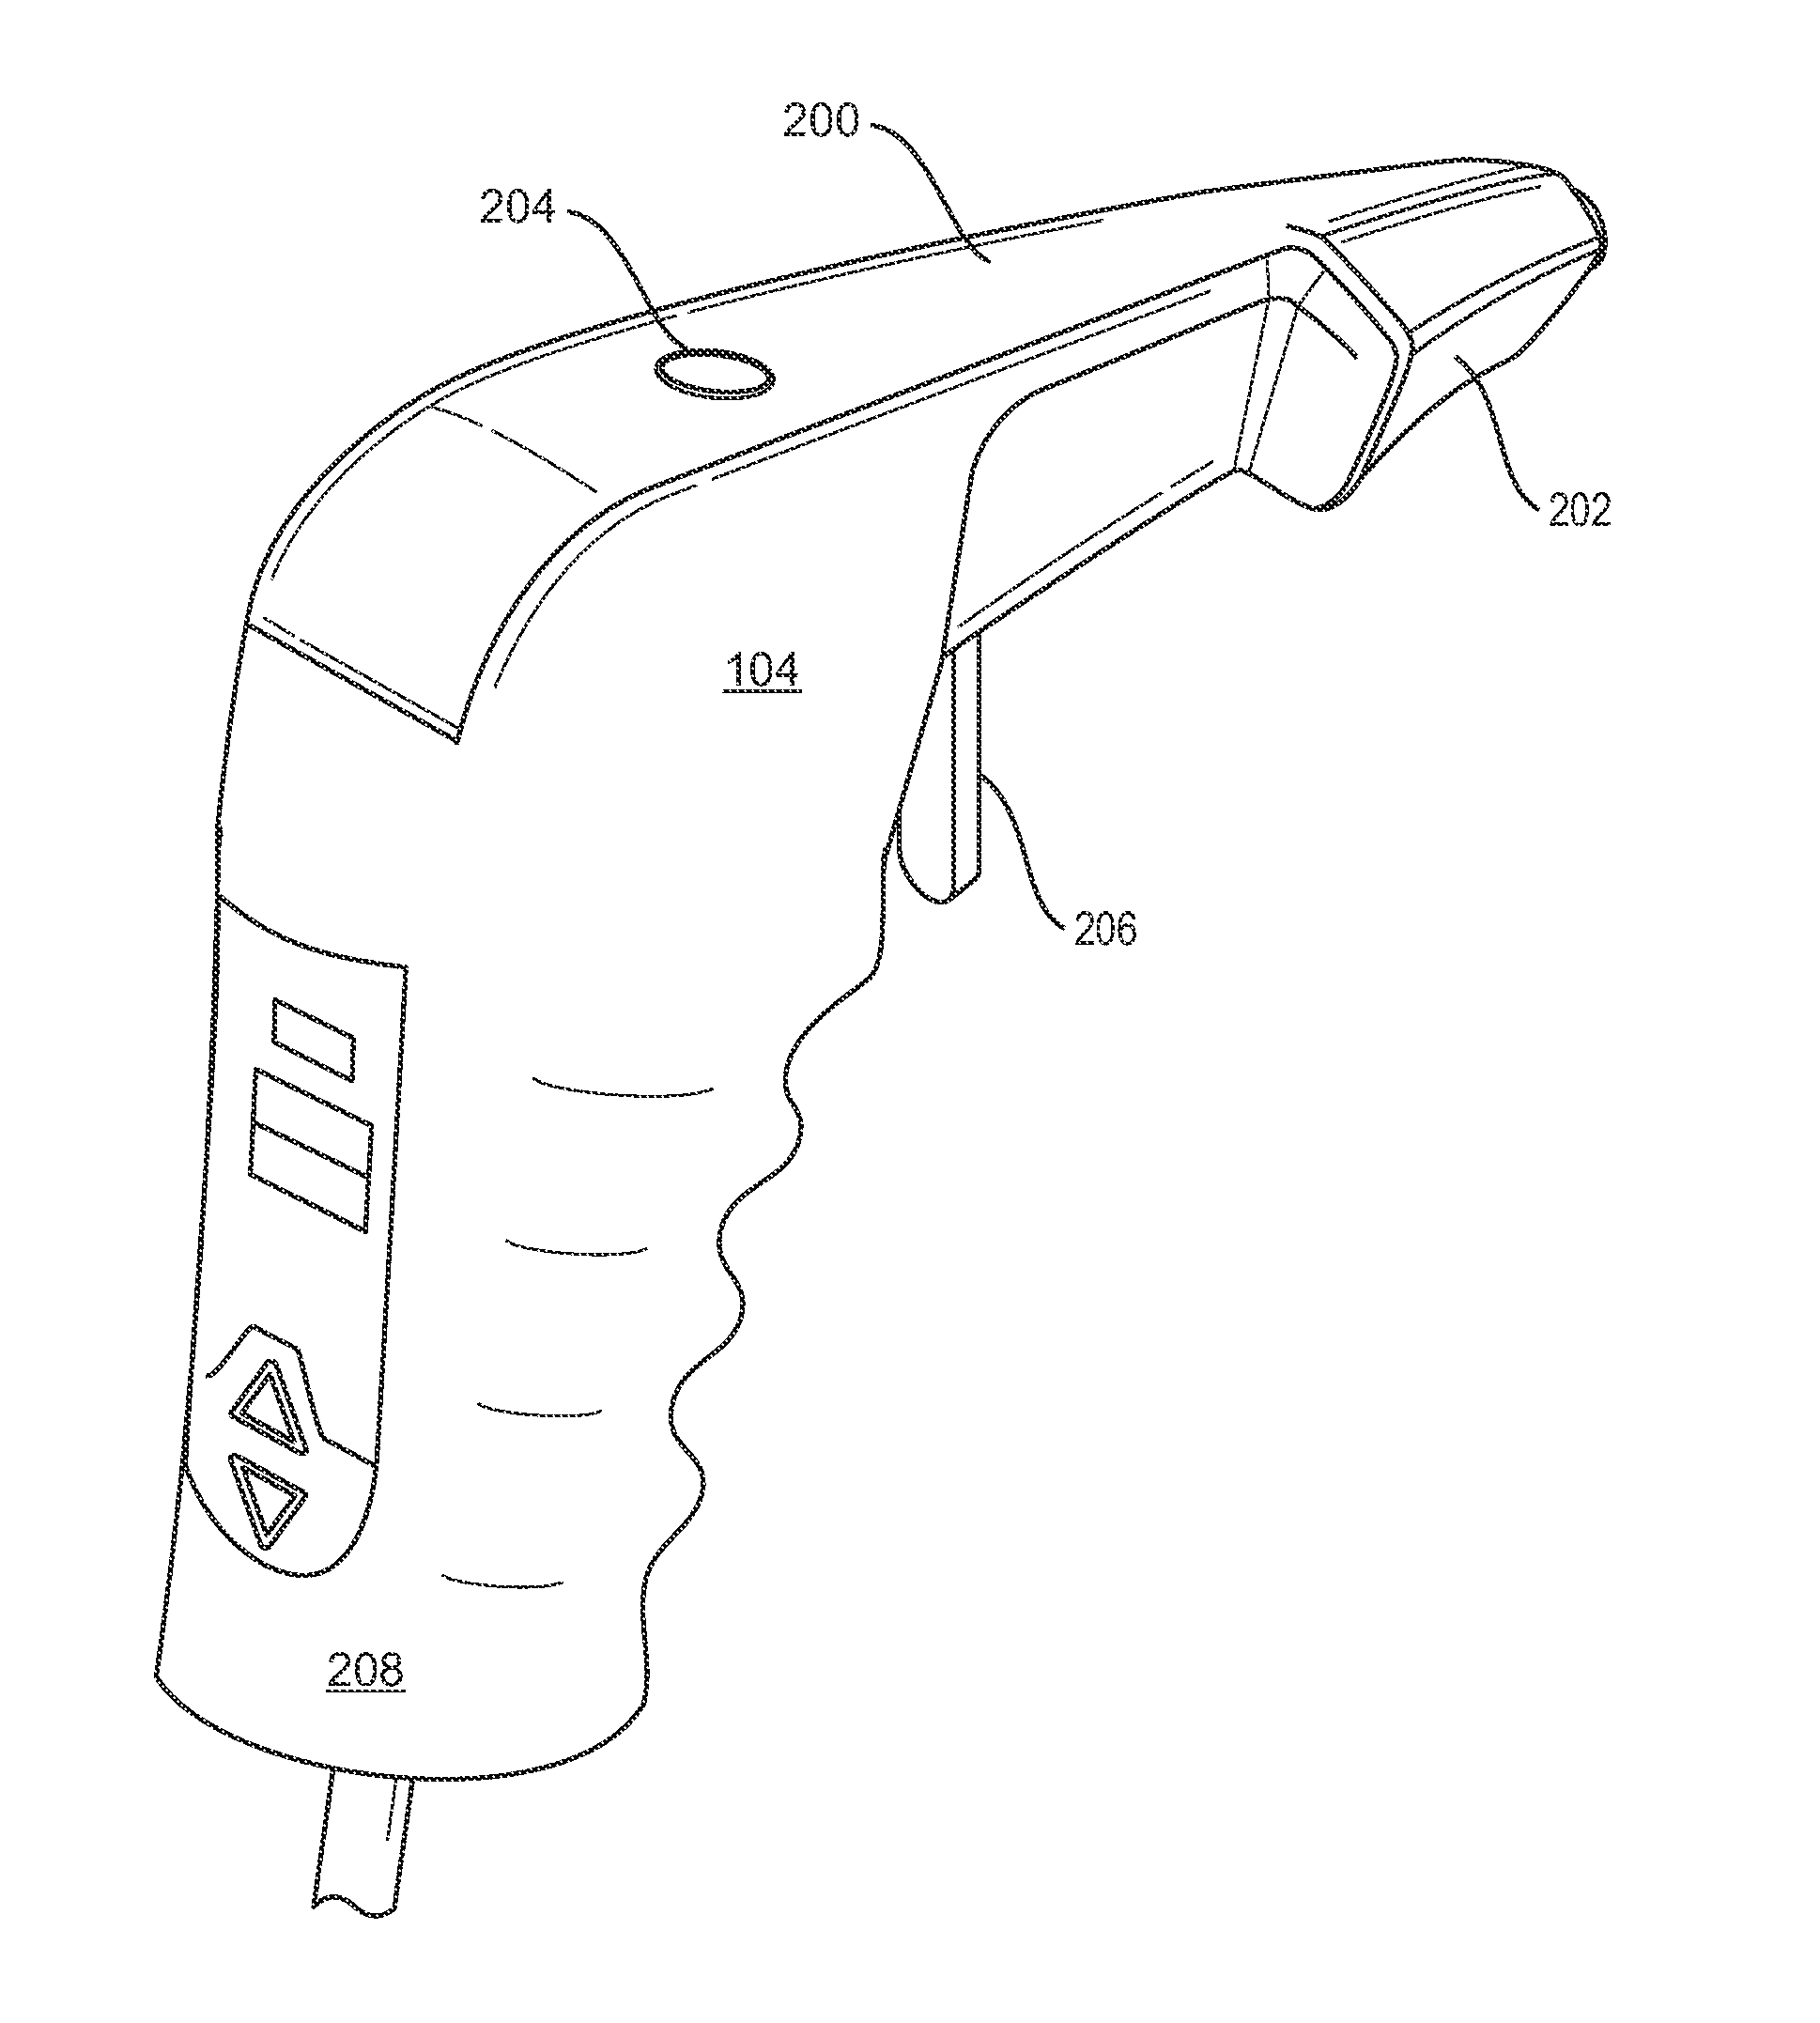 Non-surgical method for tightening both external pubic and internal vaginal tissues in a single procedure